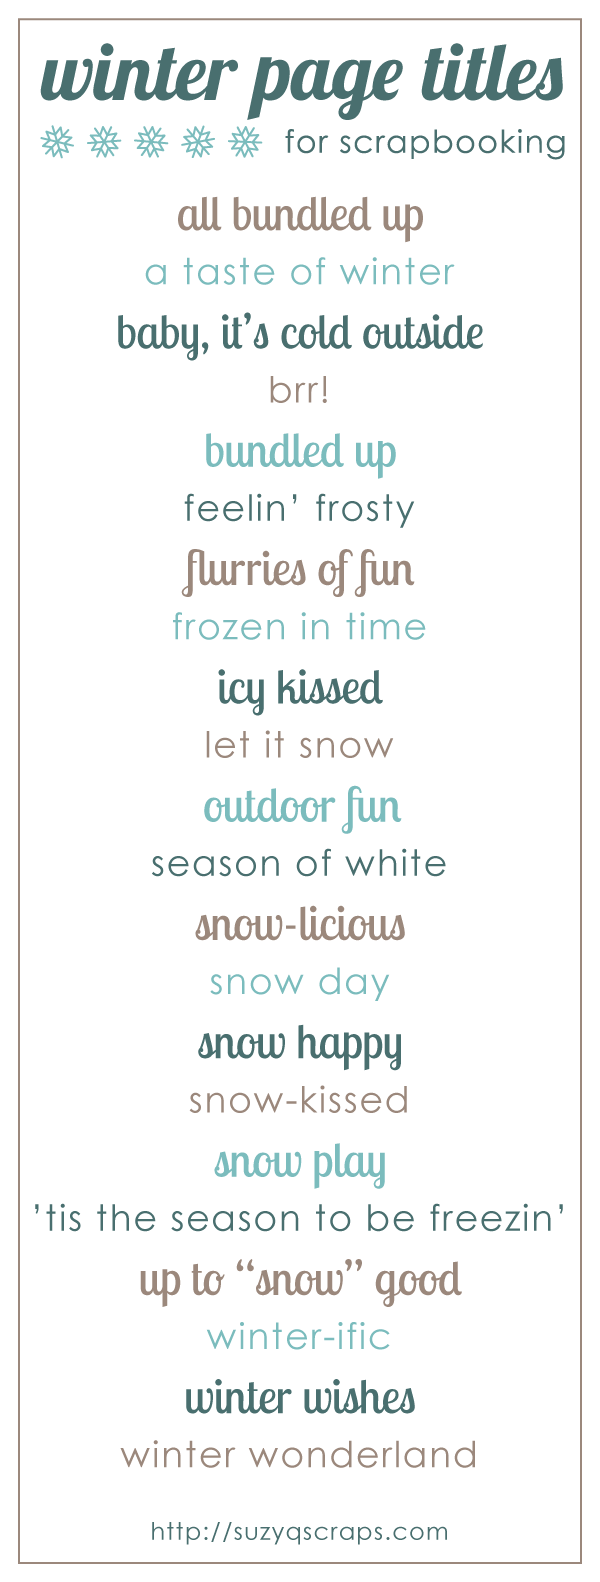 Winter scrapbook page titles – would work for treasury titles or blog titles as